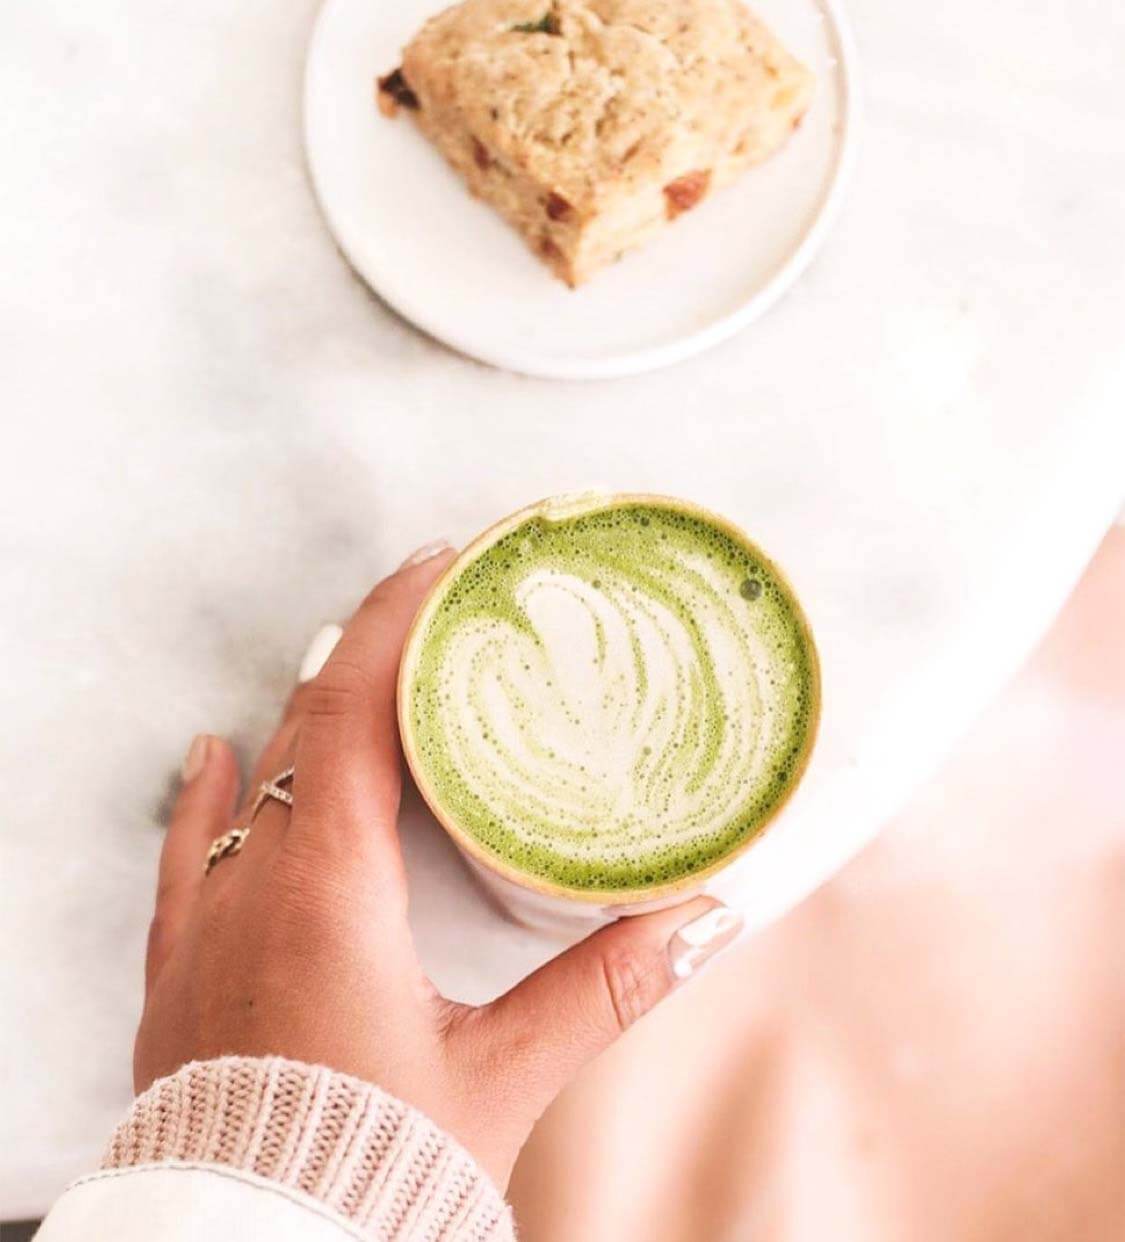 The Butcher's Daughter matcha latte